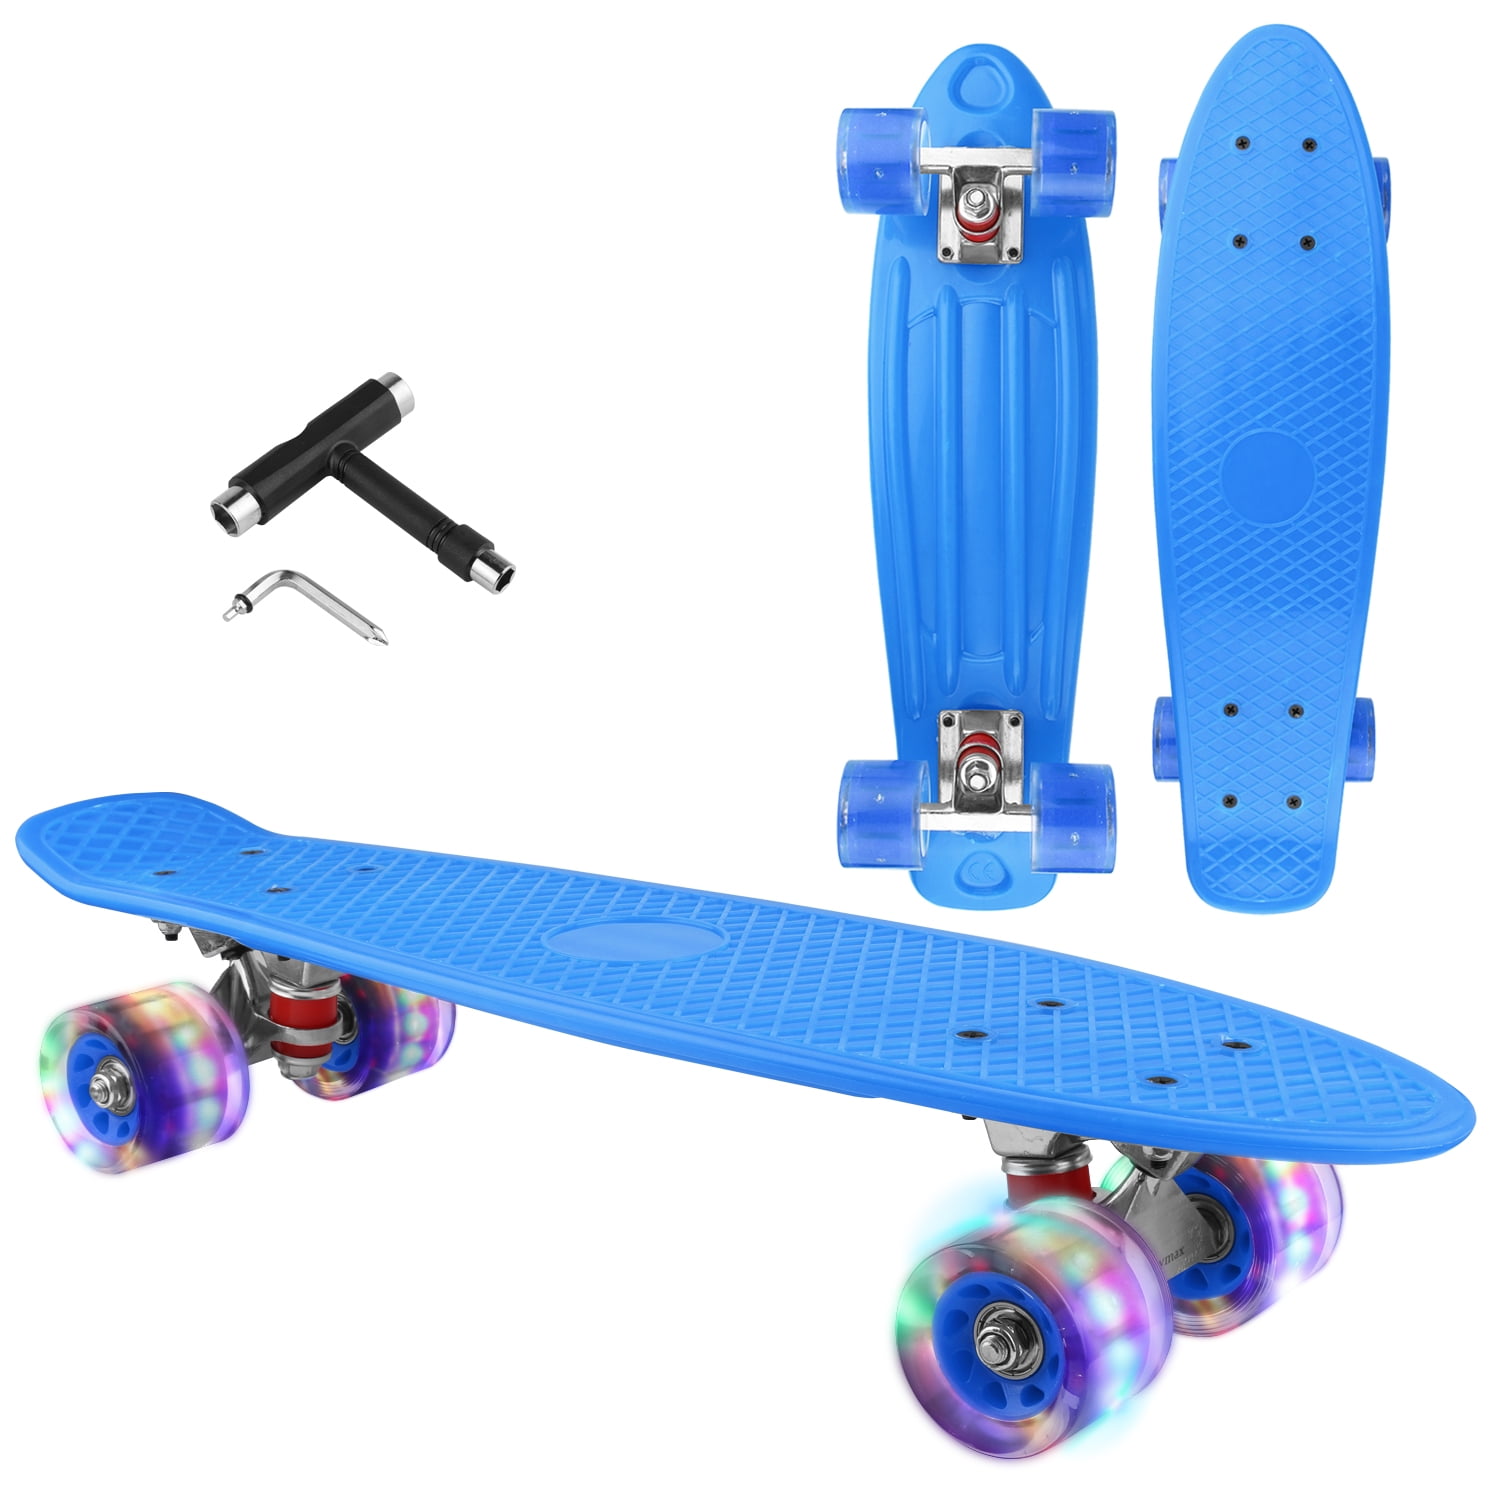 with MACH1® ABEC-11 High Speed bearings/Wheels 59x45mm 82A FunTomia Mini-Board Skateboard Retro Cruiser 22,5 INCH 57cm with or without LED Wheels